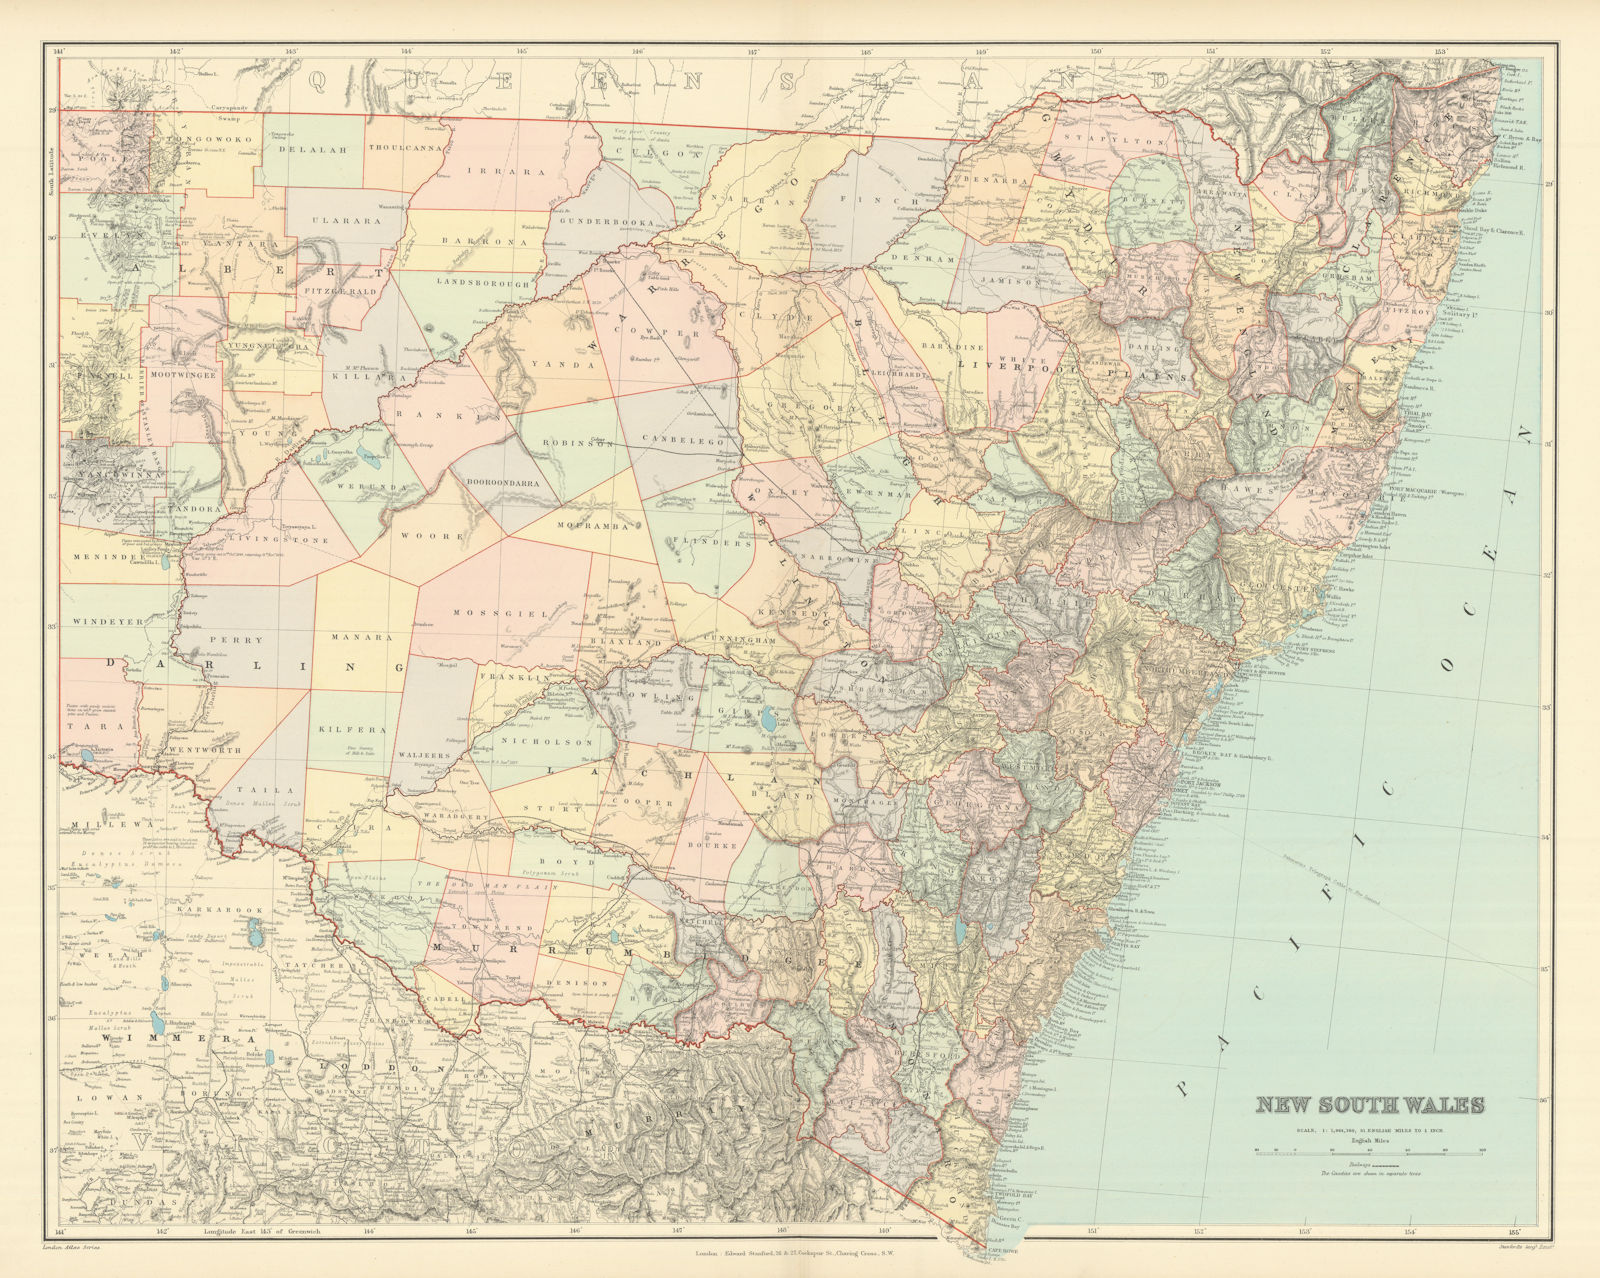 Associate Product New South Wales showing counties & railways. 53x65cm. STANFORD 1894 old map